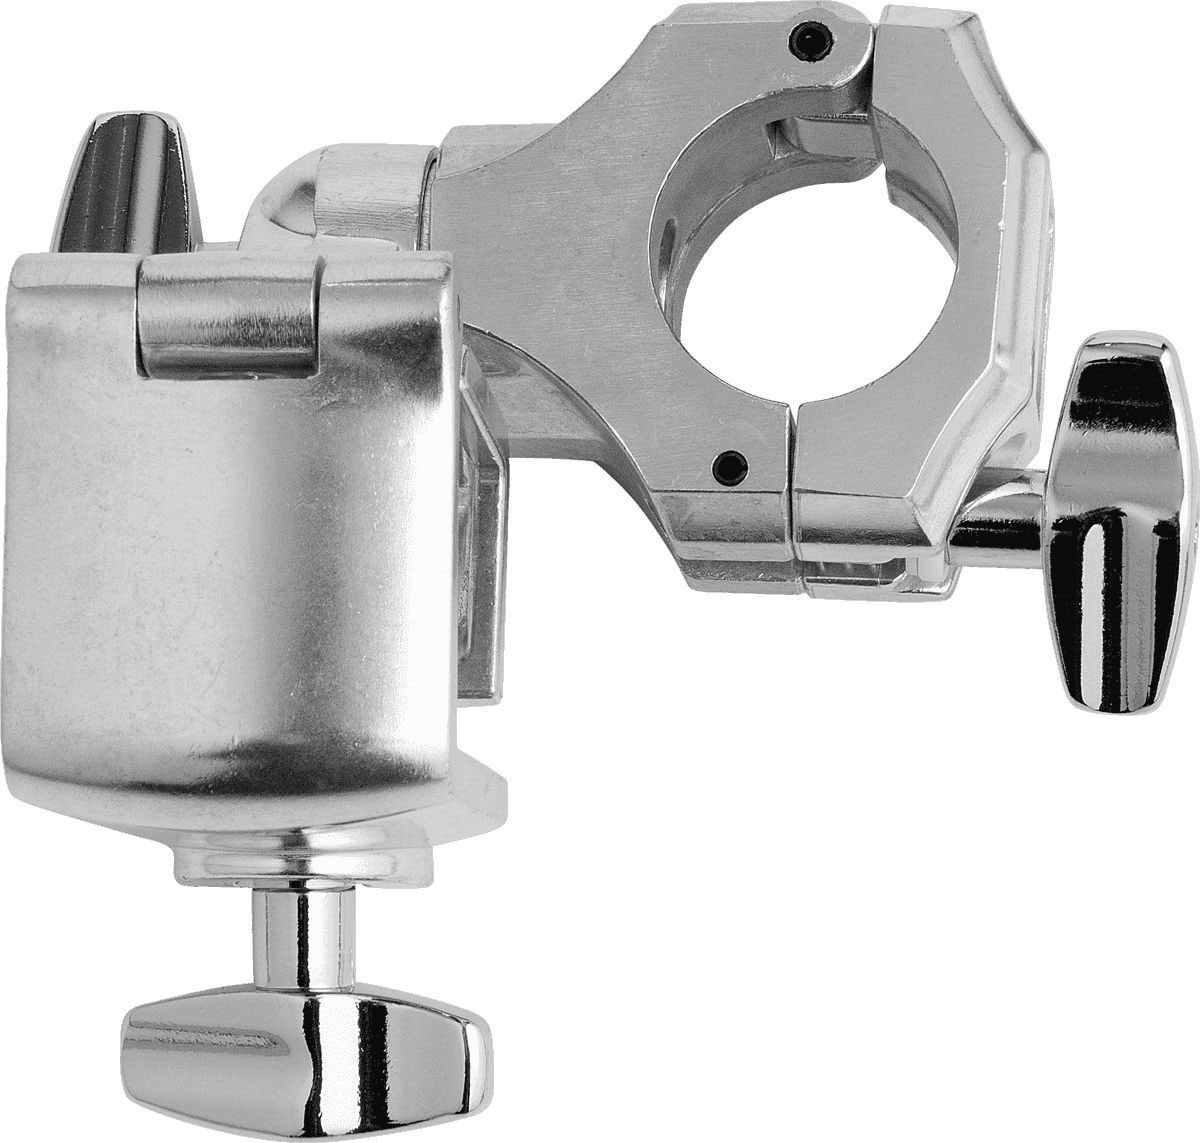 PEARL DRUMS HARDWARE MULTI-ANGLE RACK CLAMP